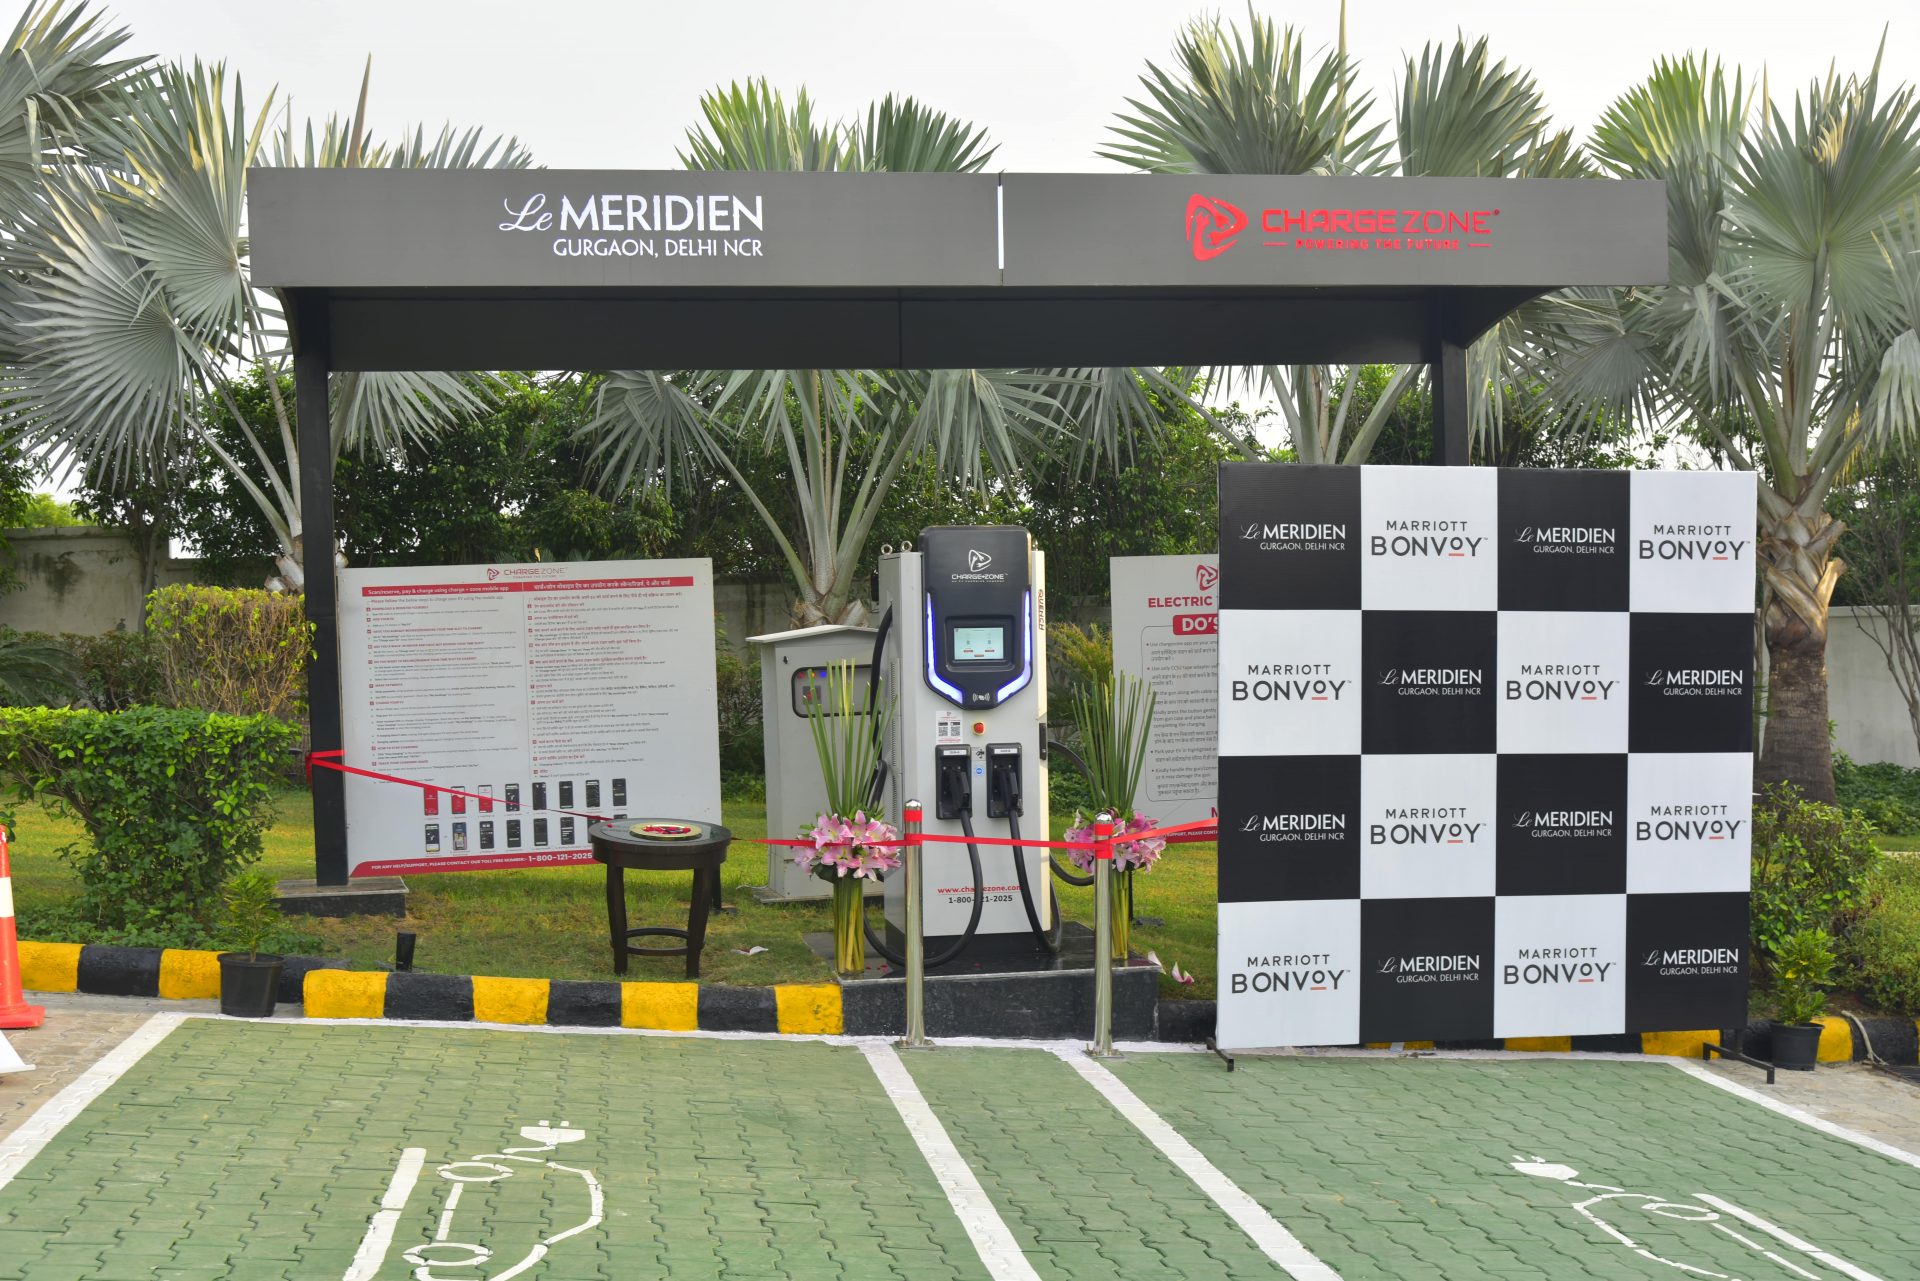 Le Meridien Gurgaon, Delhi NCR launches an electric vehicle charging